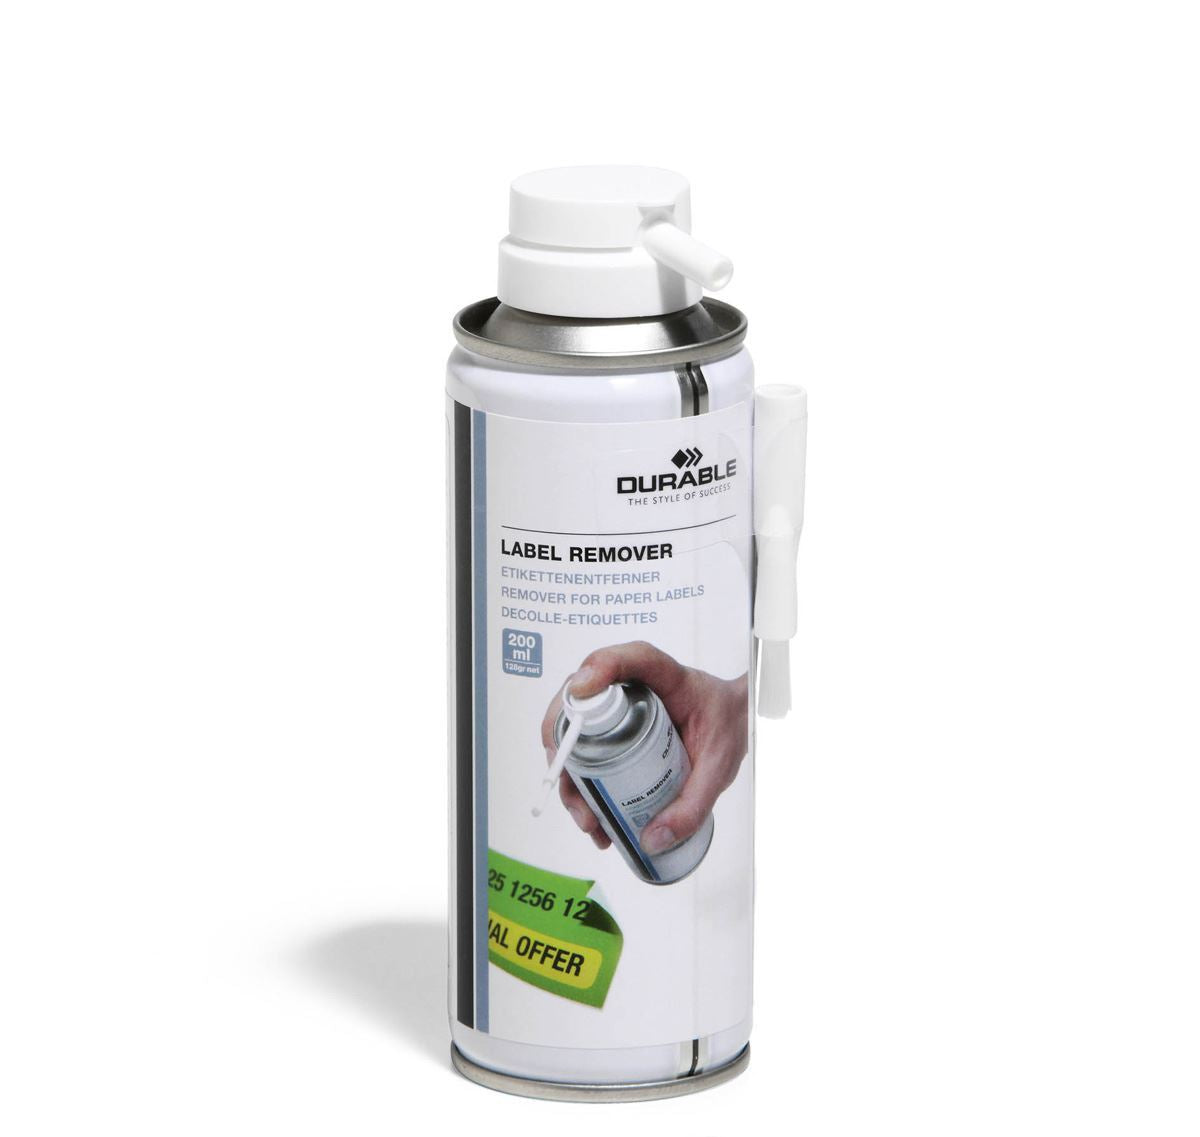 Durable LABEL REMOVER for Adhesive Residue, Glue, Tape and Stickers | 200ml